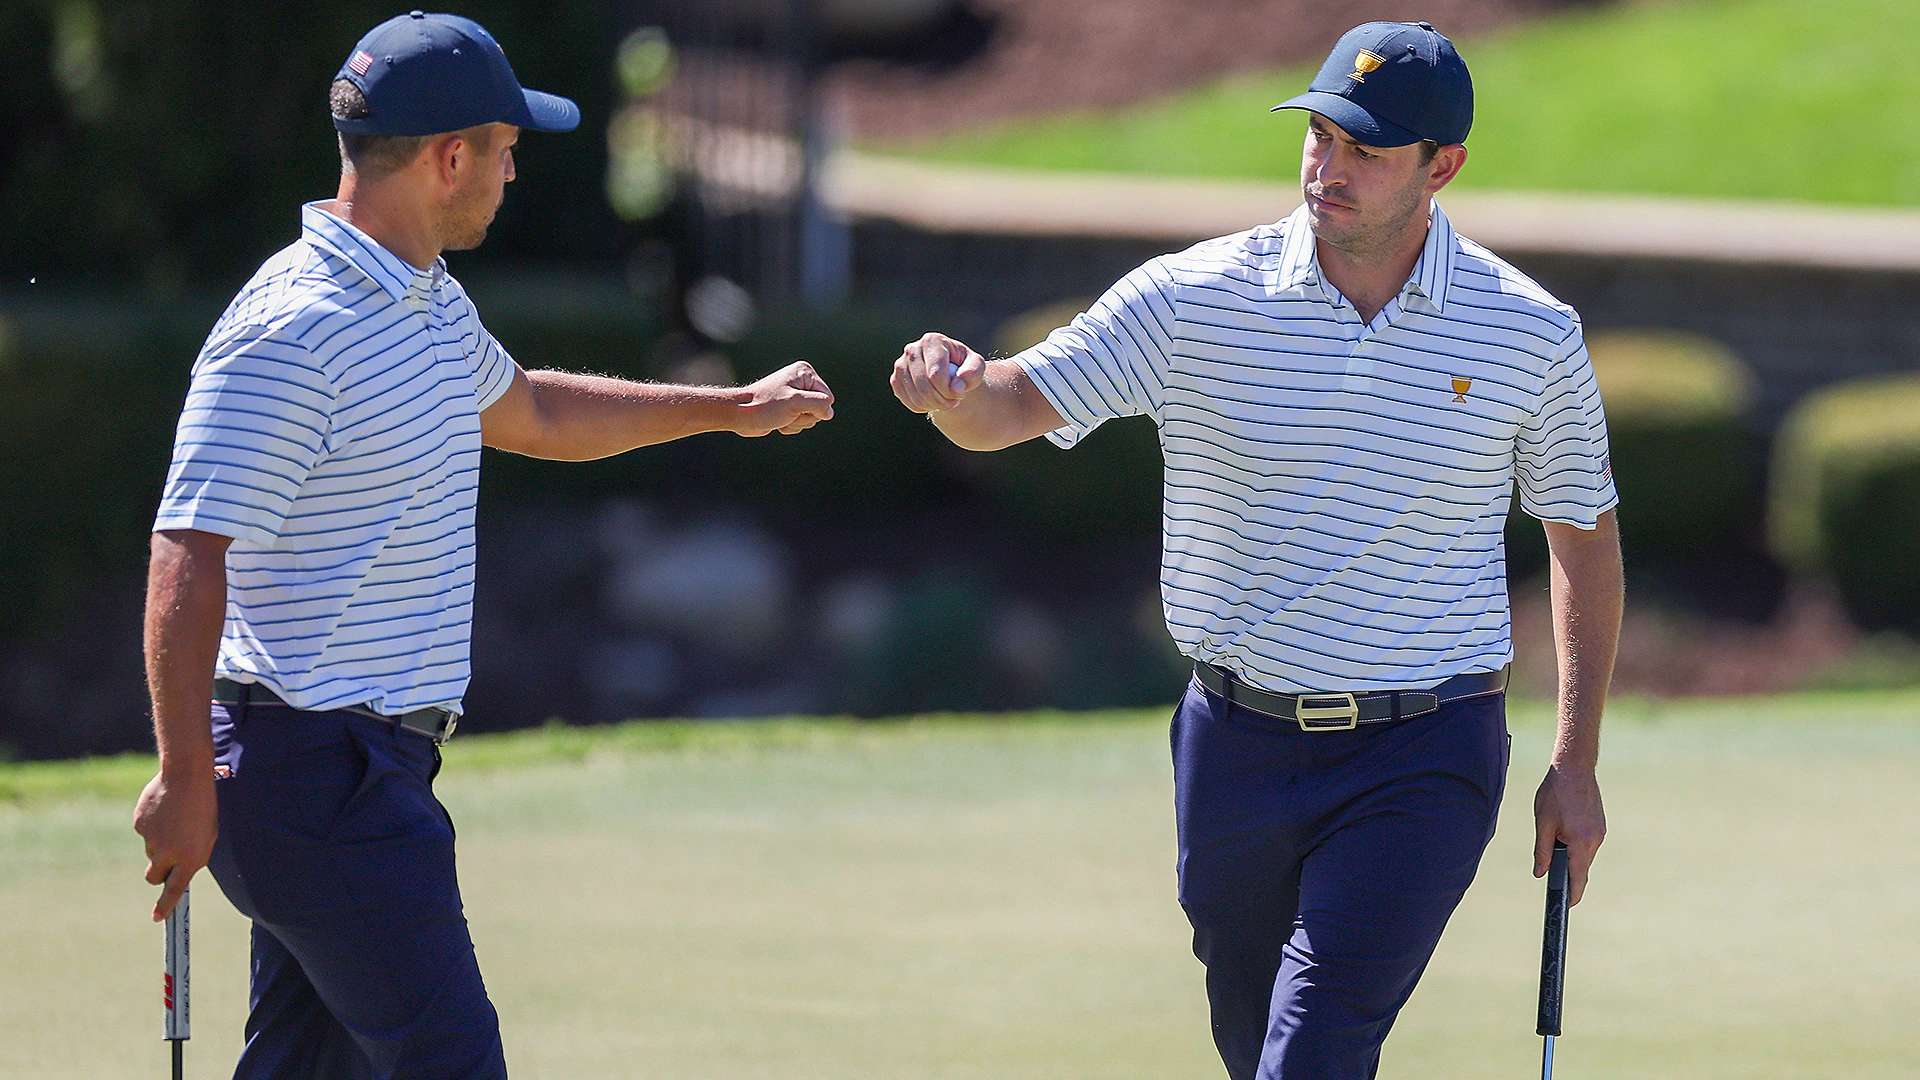 Presidents Cup pairings: Day 3 fourball matchups, tee times at Quail Hollow